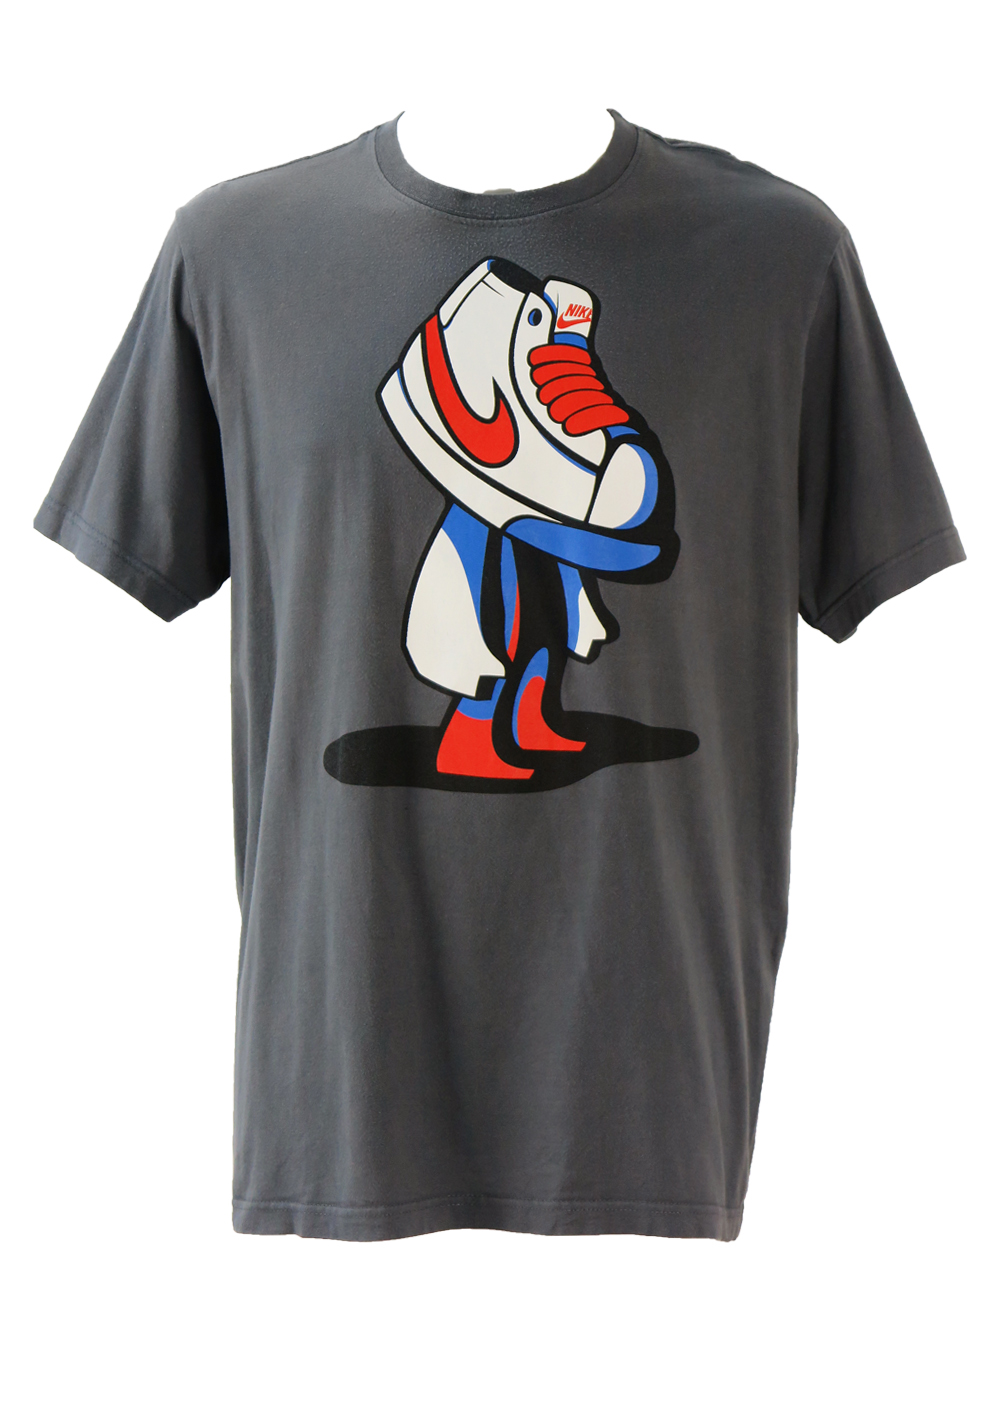 Grey Nike T  Shirt  with Graphic  Trainer Head Man Print L 